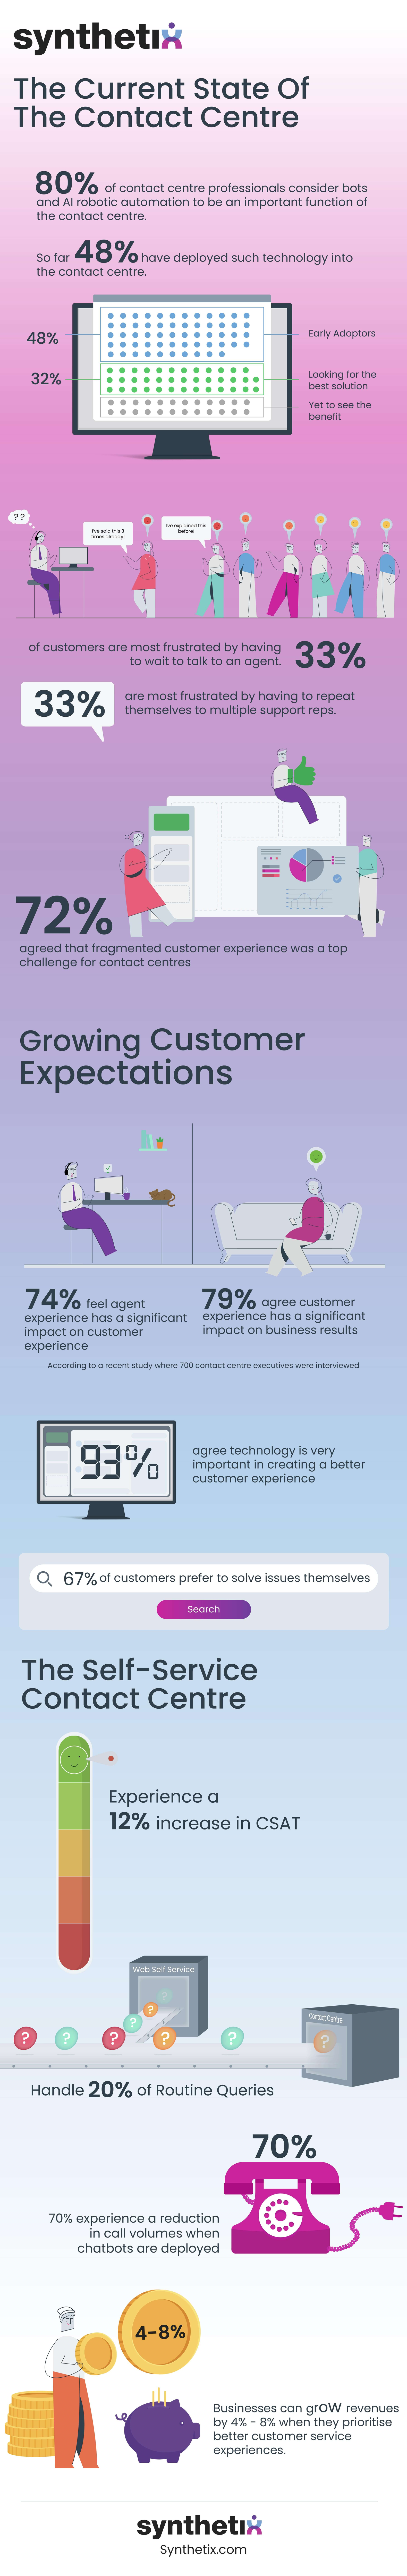 Infographic about The Current State Of The Contact Centre